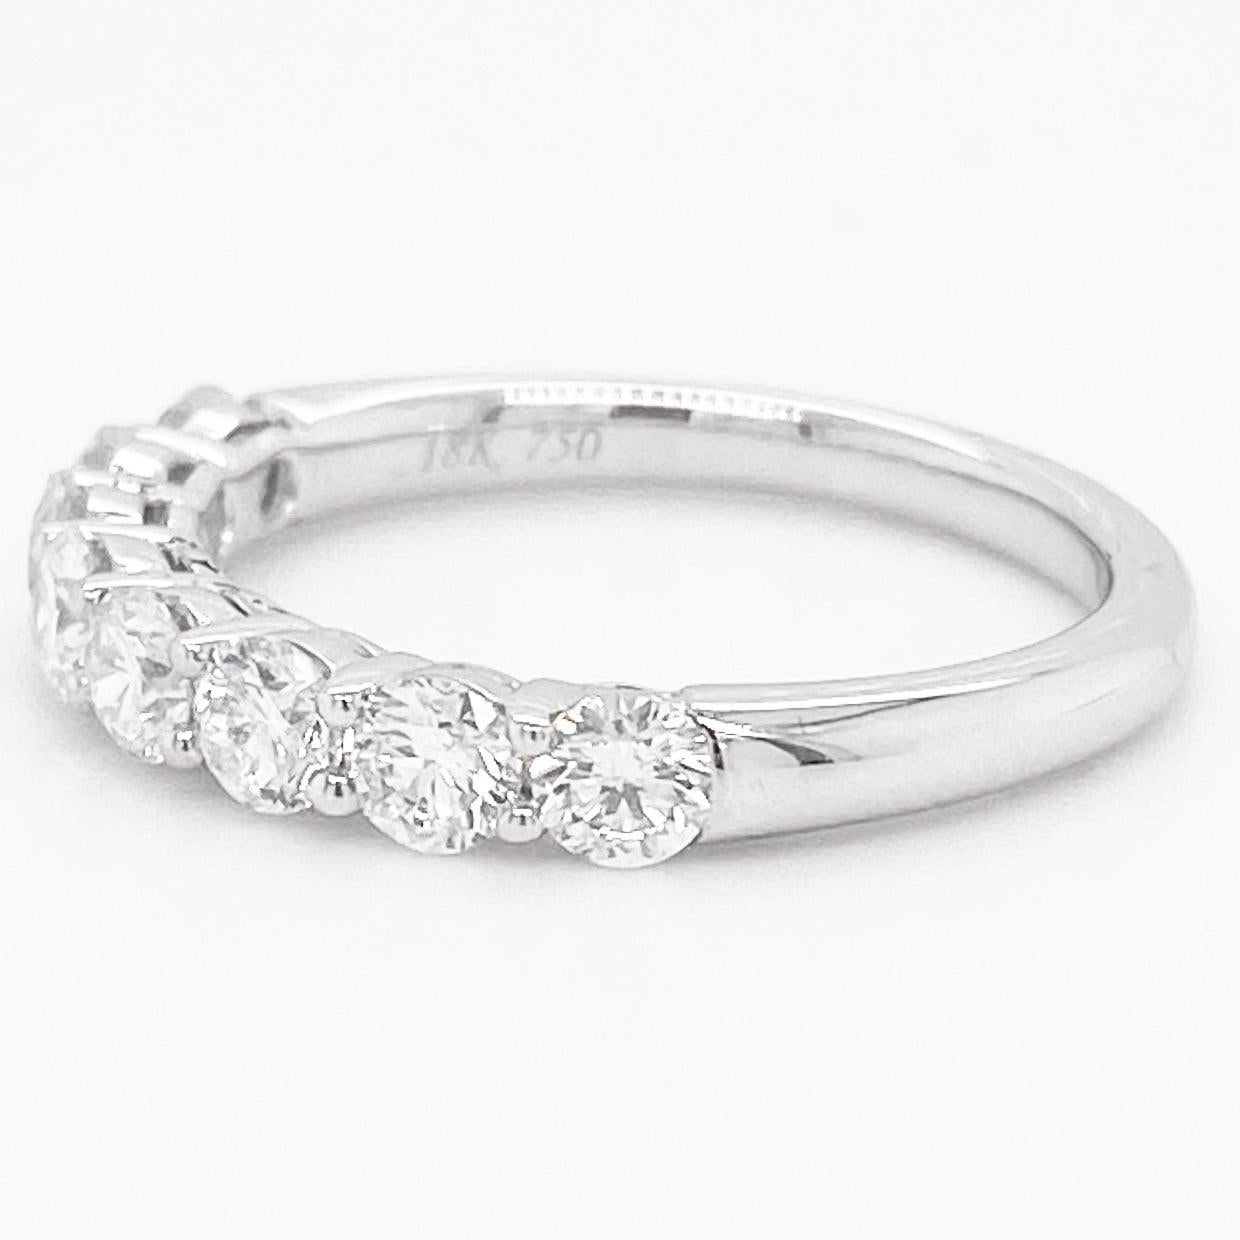 For Sale:  Diamond Band Ring, 1.11 Carat Round Diamond, Wedding Band, Stackable 3